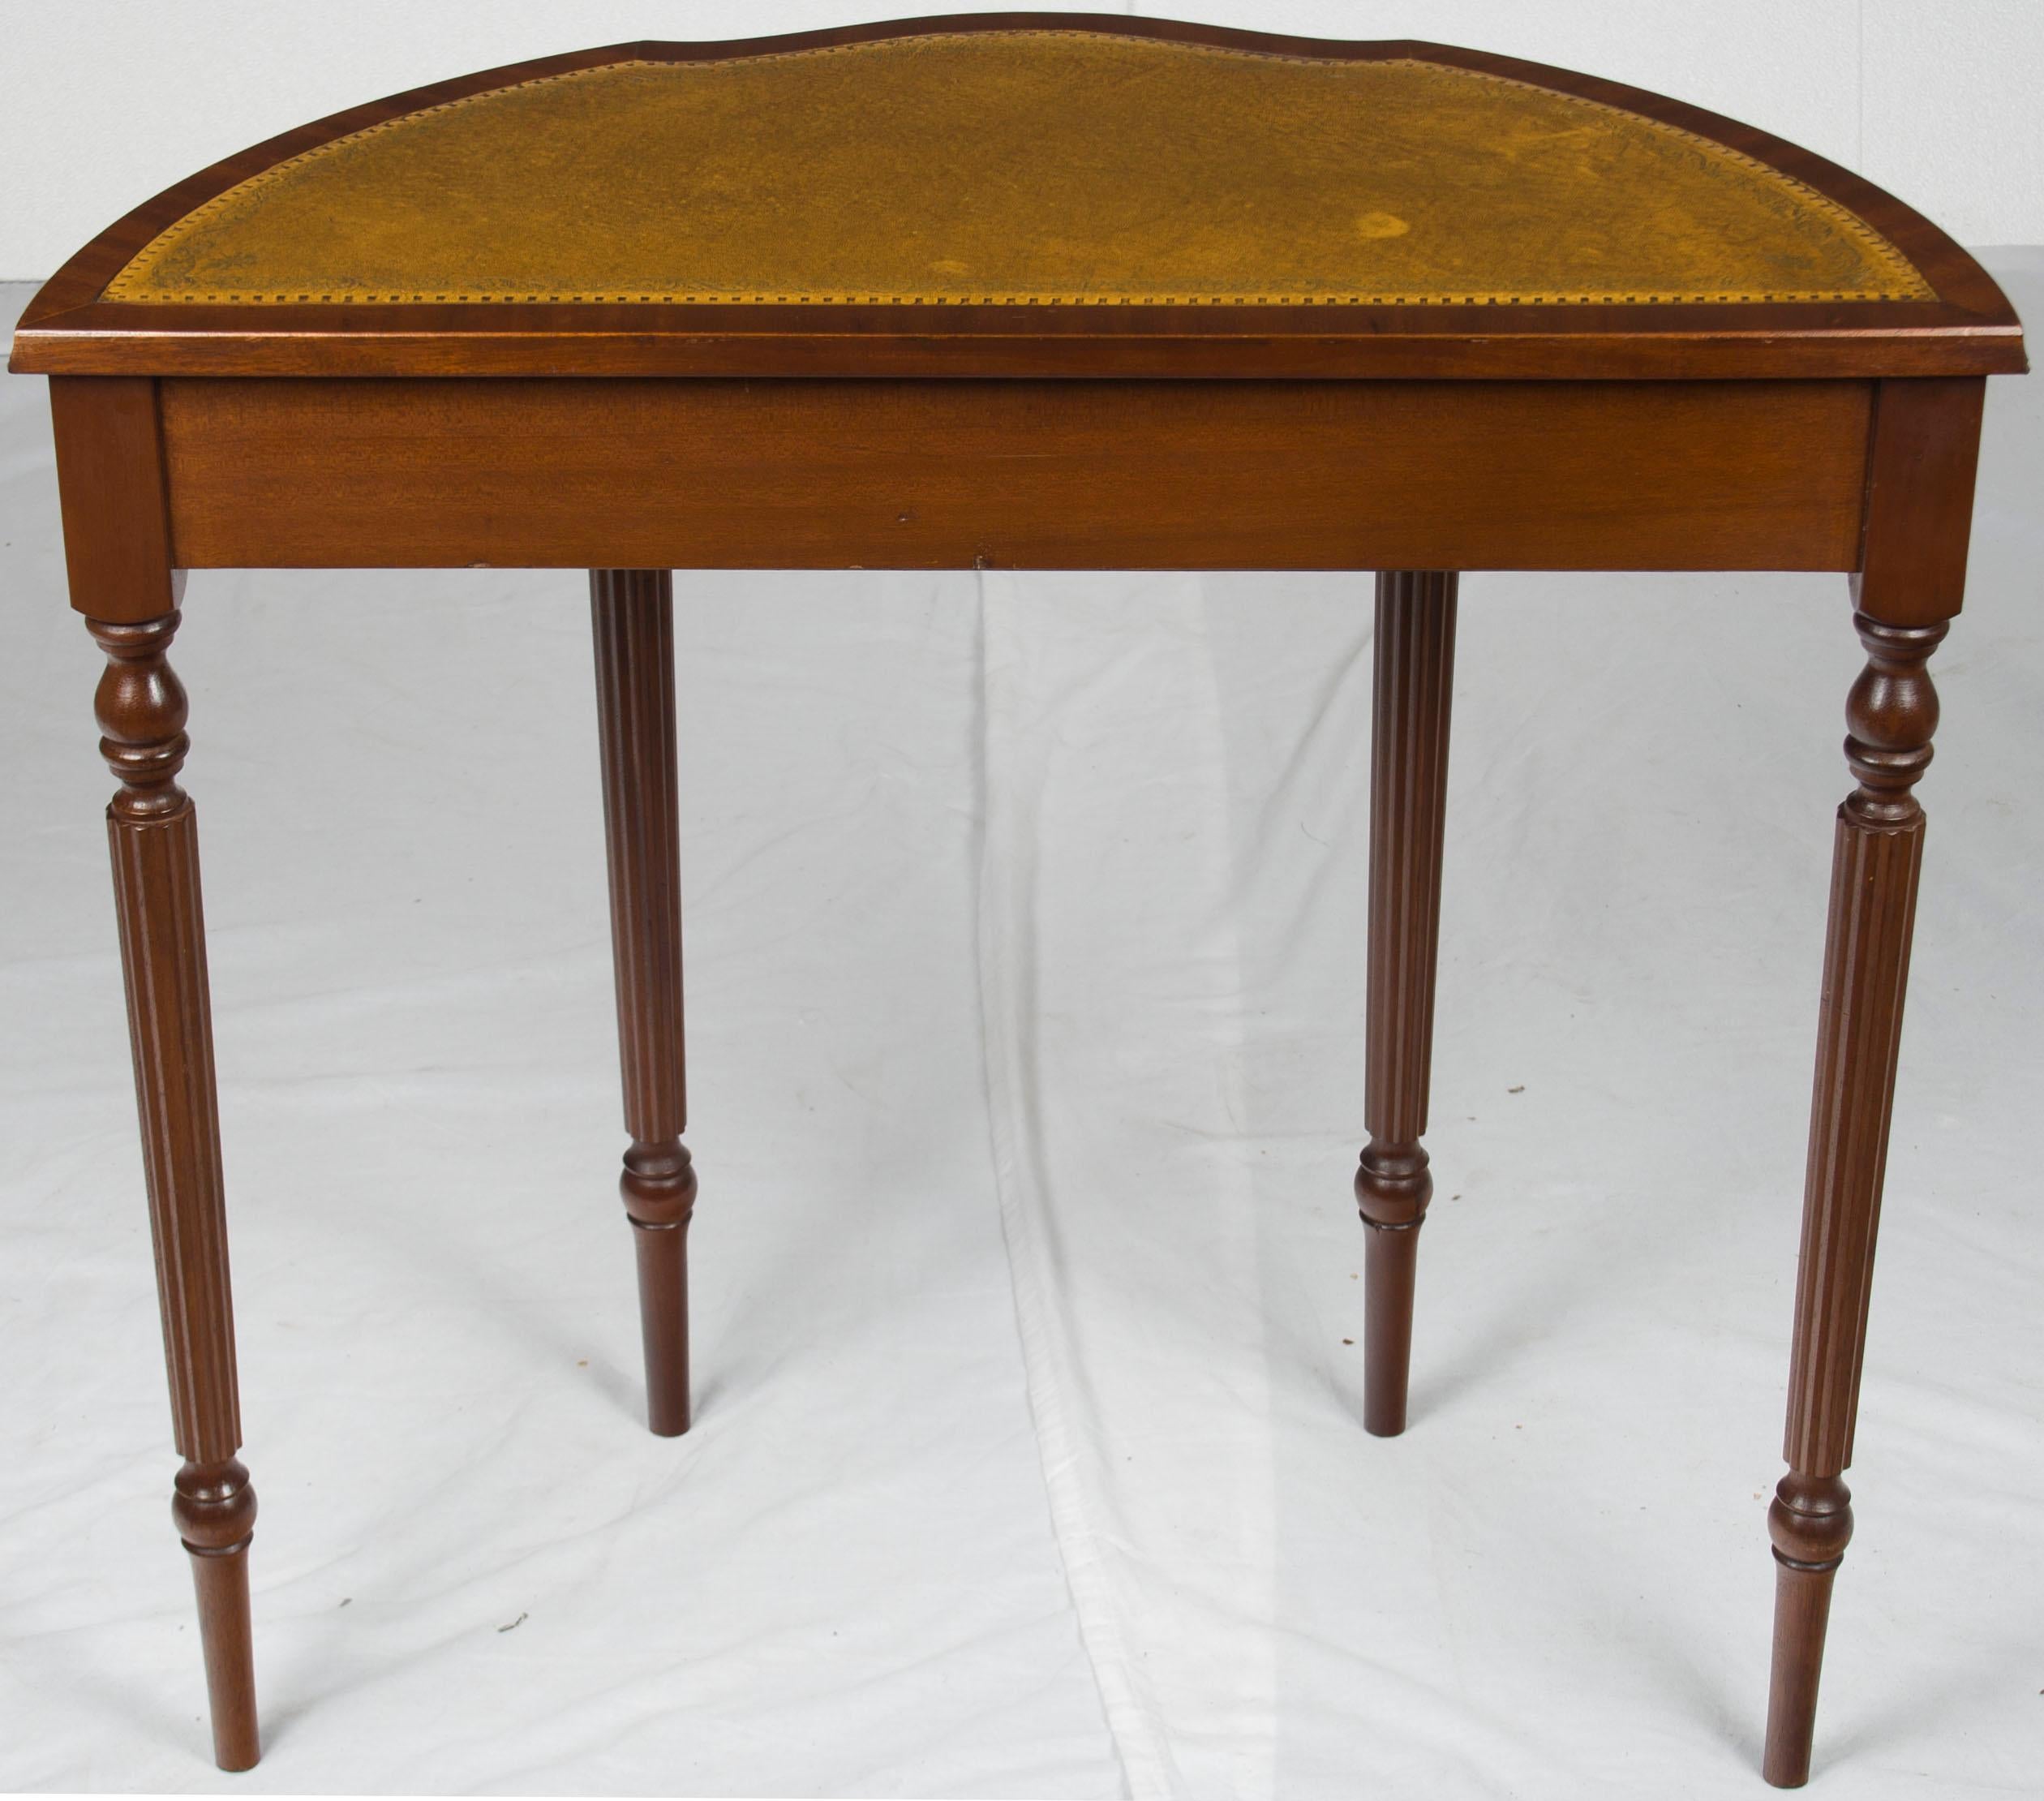 Mahogany Leather Top Demilune Hall Table with Drawer In Good Condition For Sale In Atlanta, GA